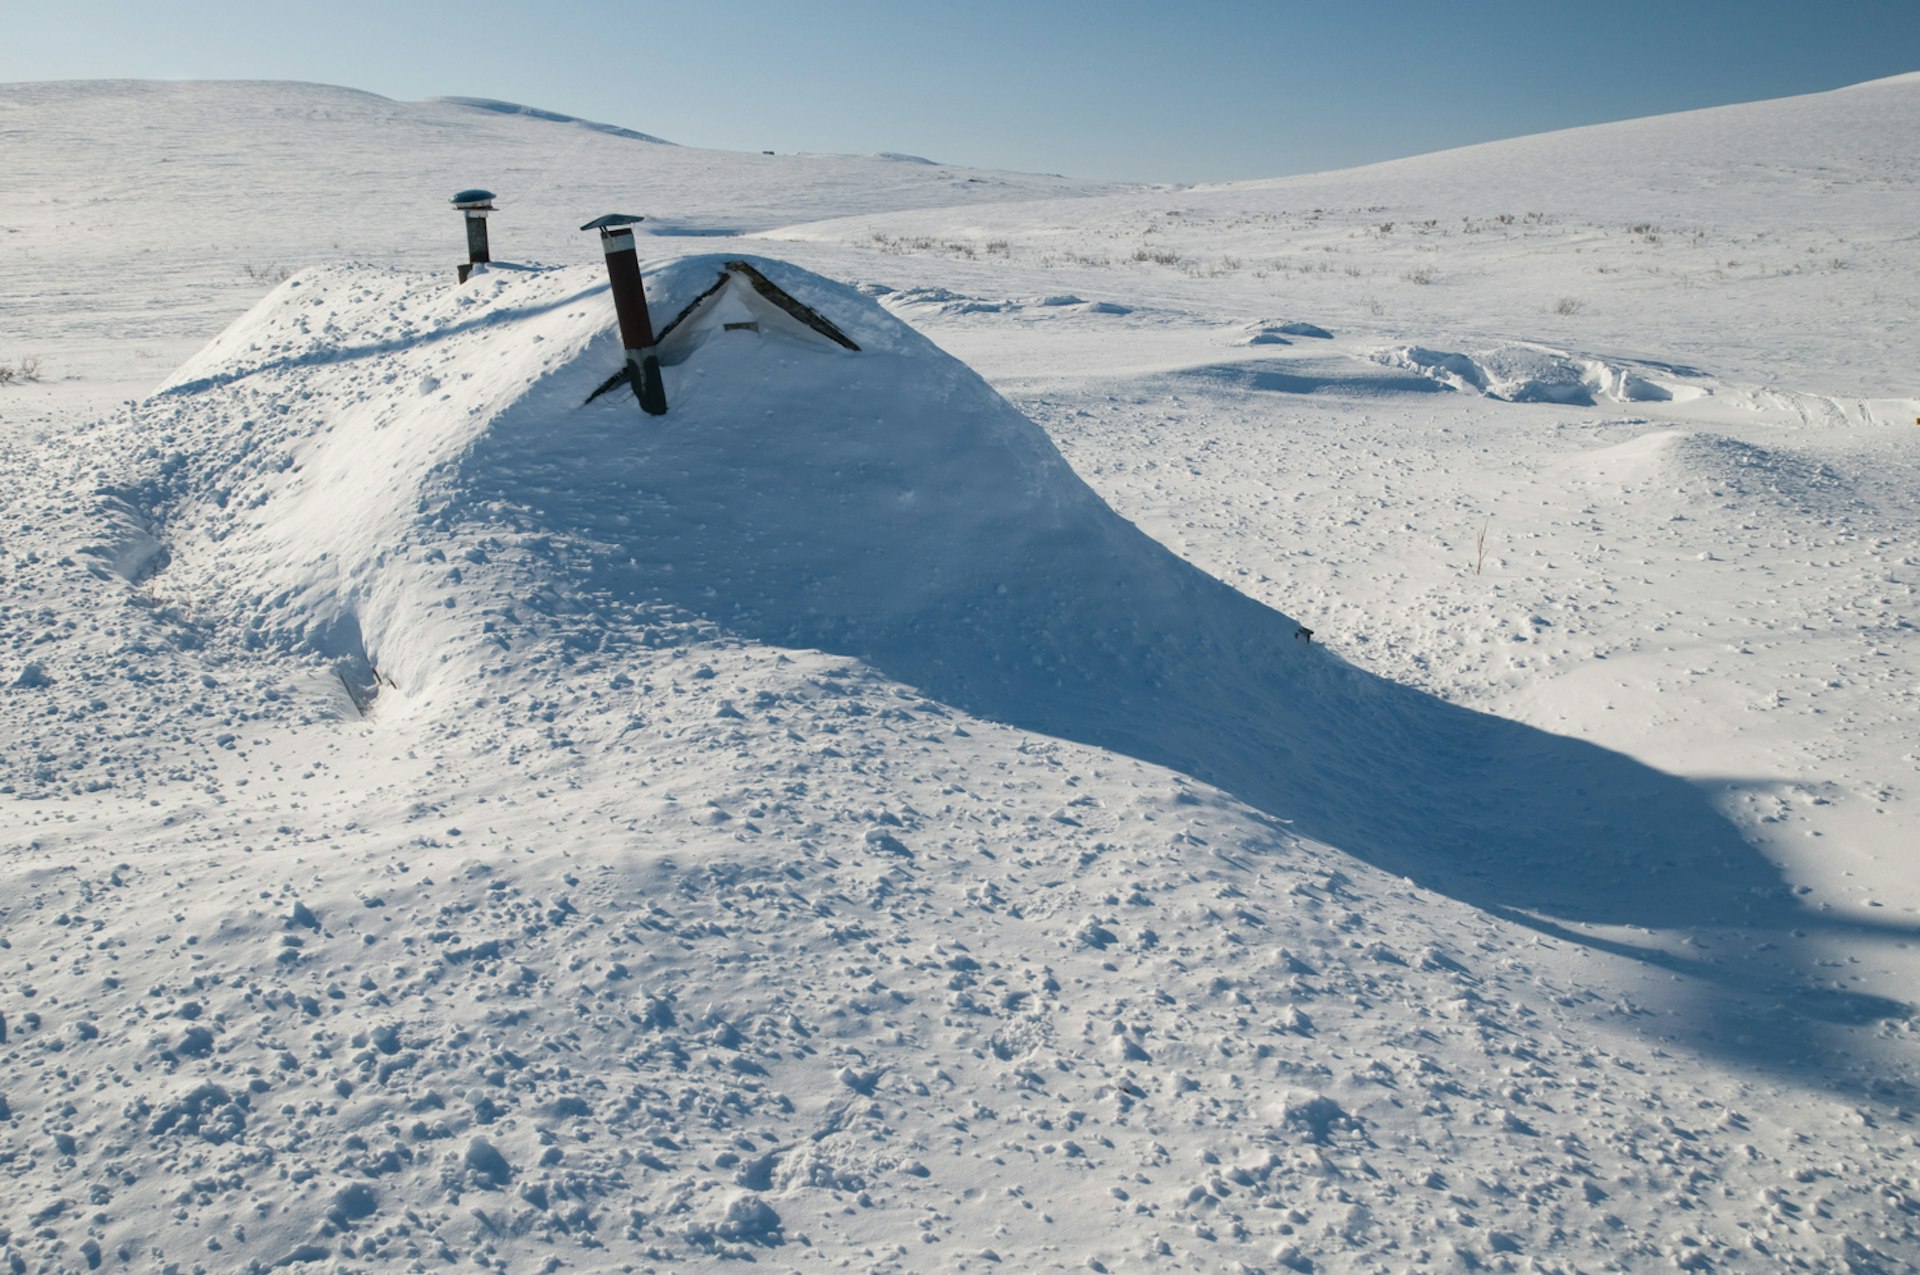 Subarctic Nome can see weather like this snowstorm that left a cabin buried to its stovepipes © Daryl Pederson / Design Pics / Getty